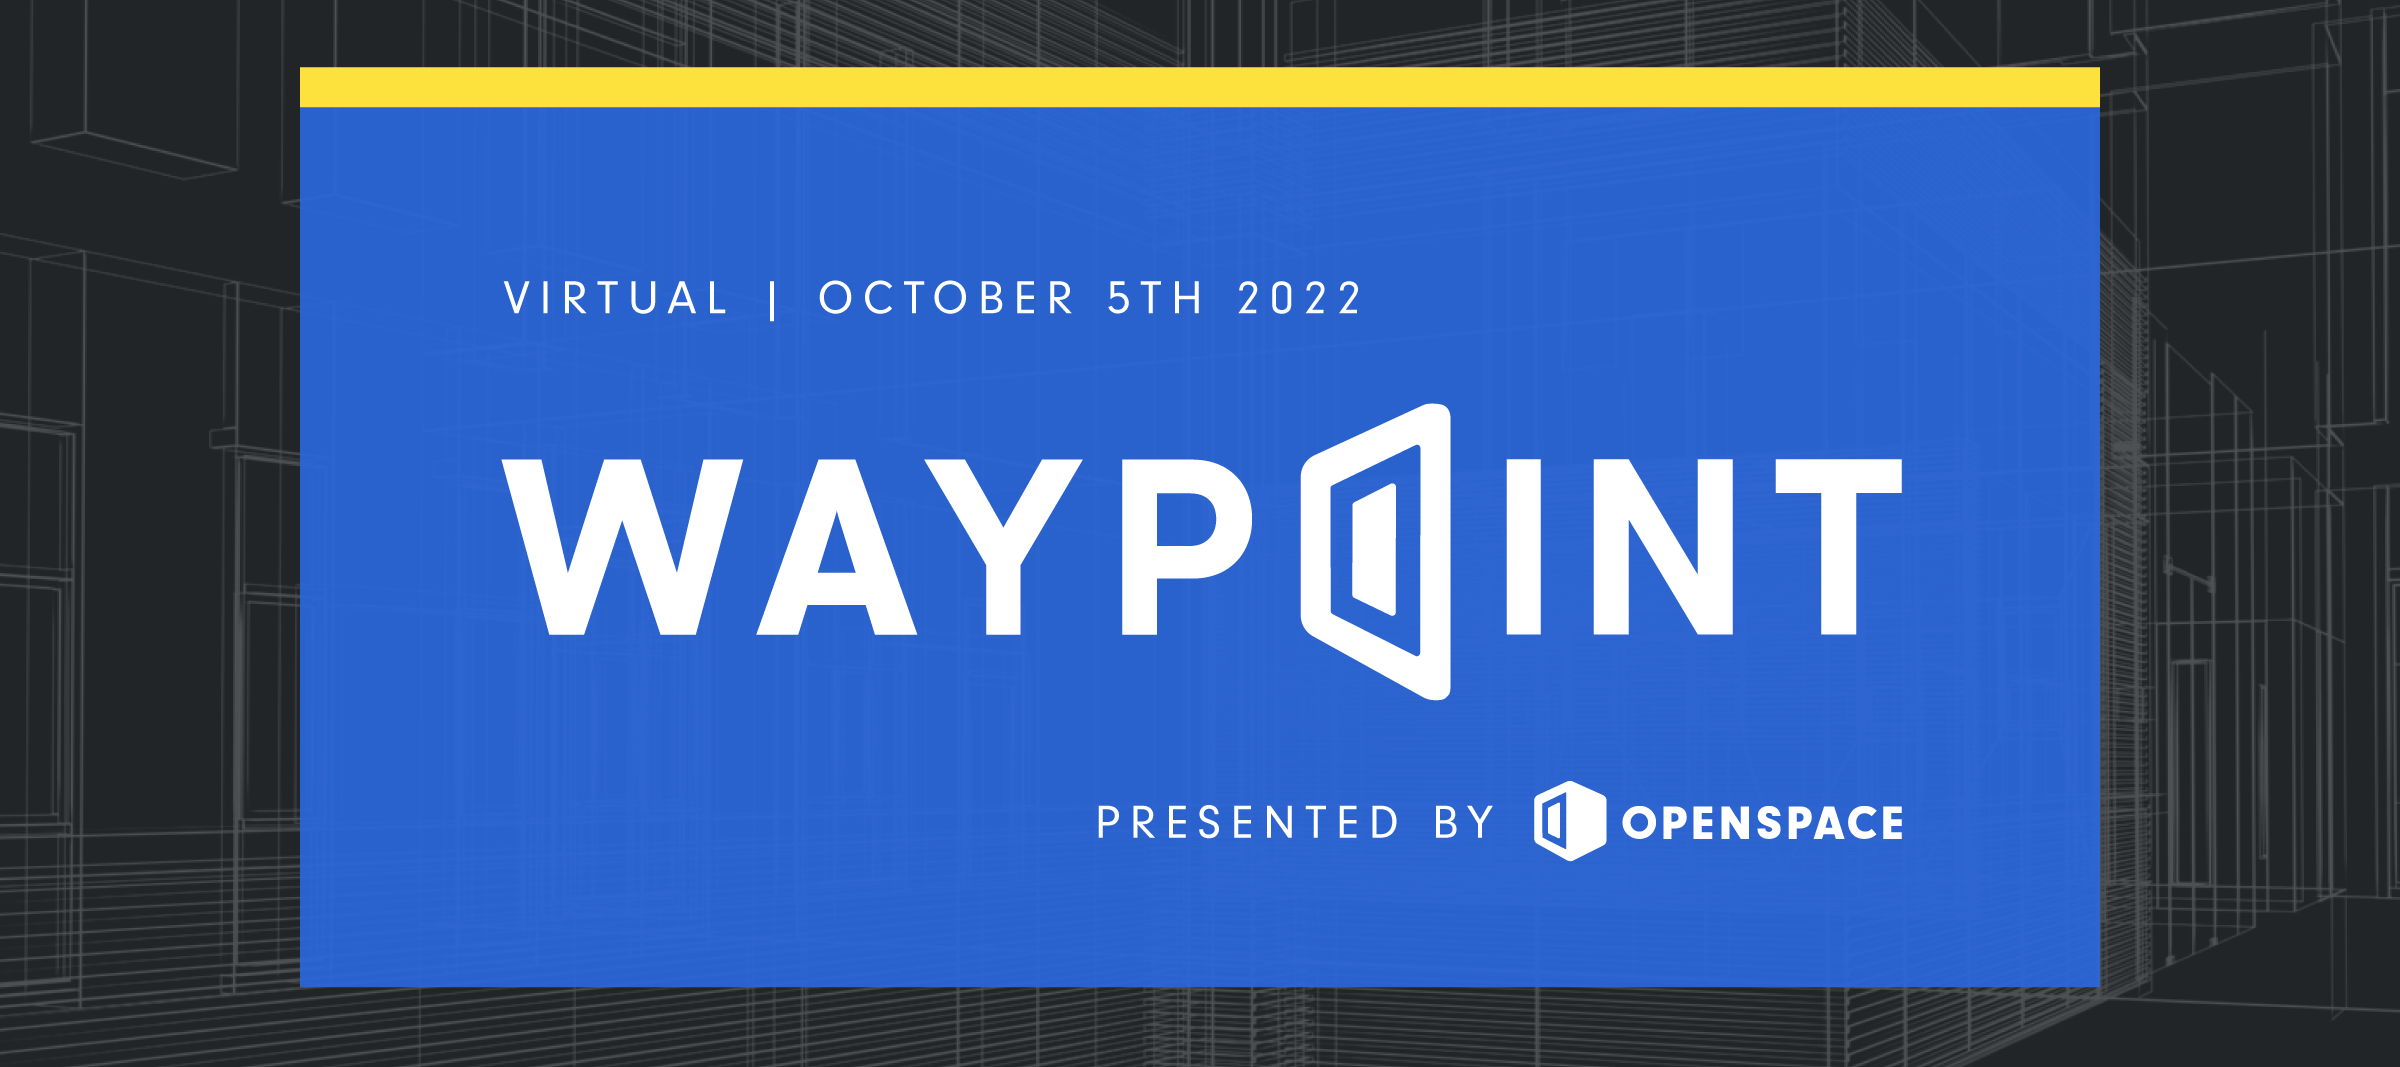 Waypoint Countdown Begins - Join Us Here!